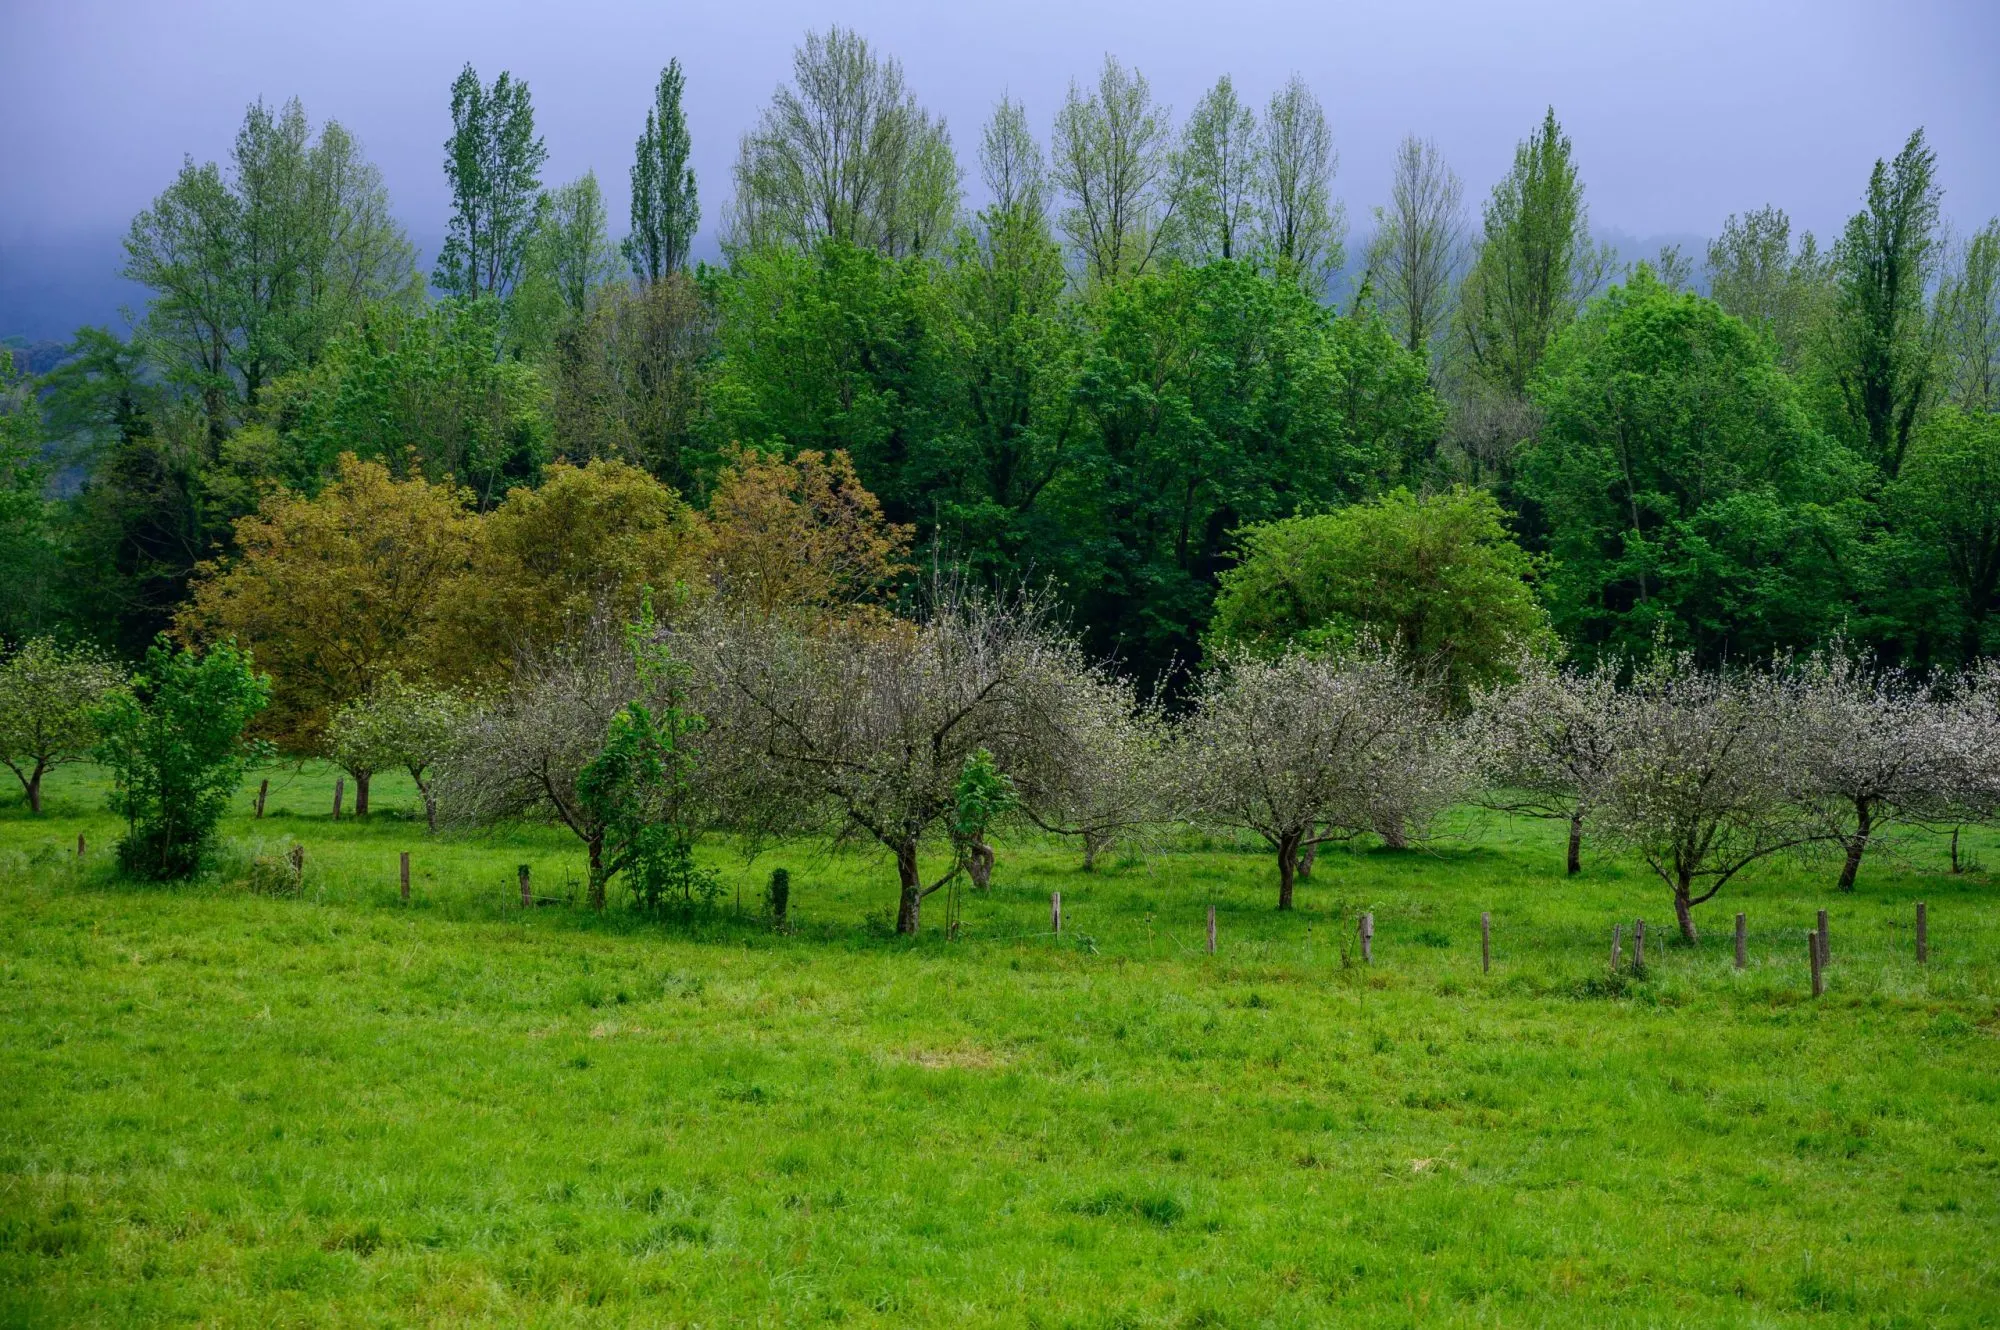 Apple tree orchards in Asturias, spring white blossom of apple trees, production of famous cider in Asturias, Comarca de la Sidra region, Spain